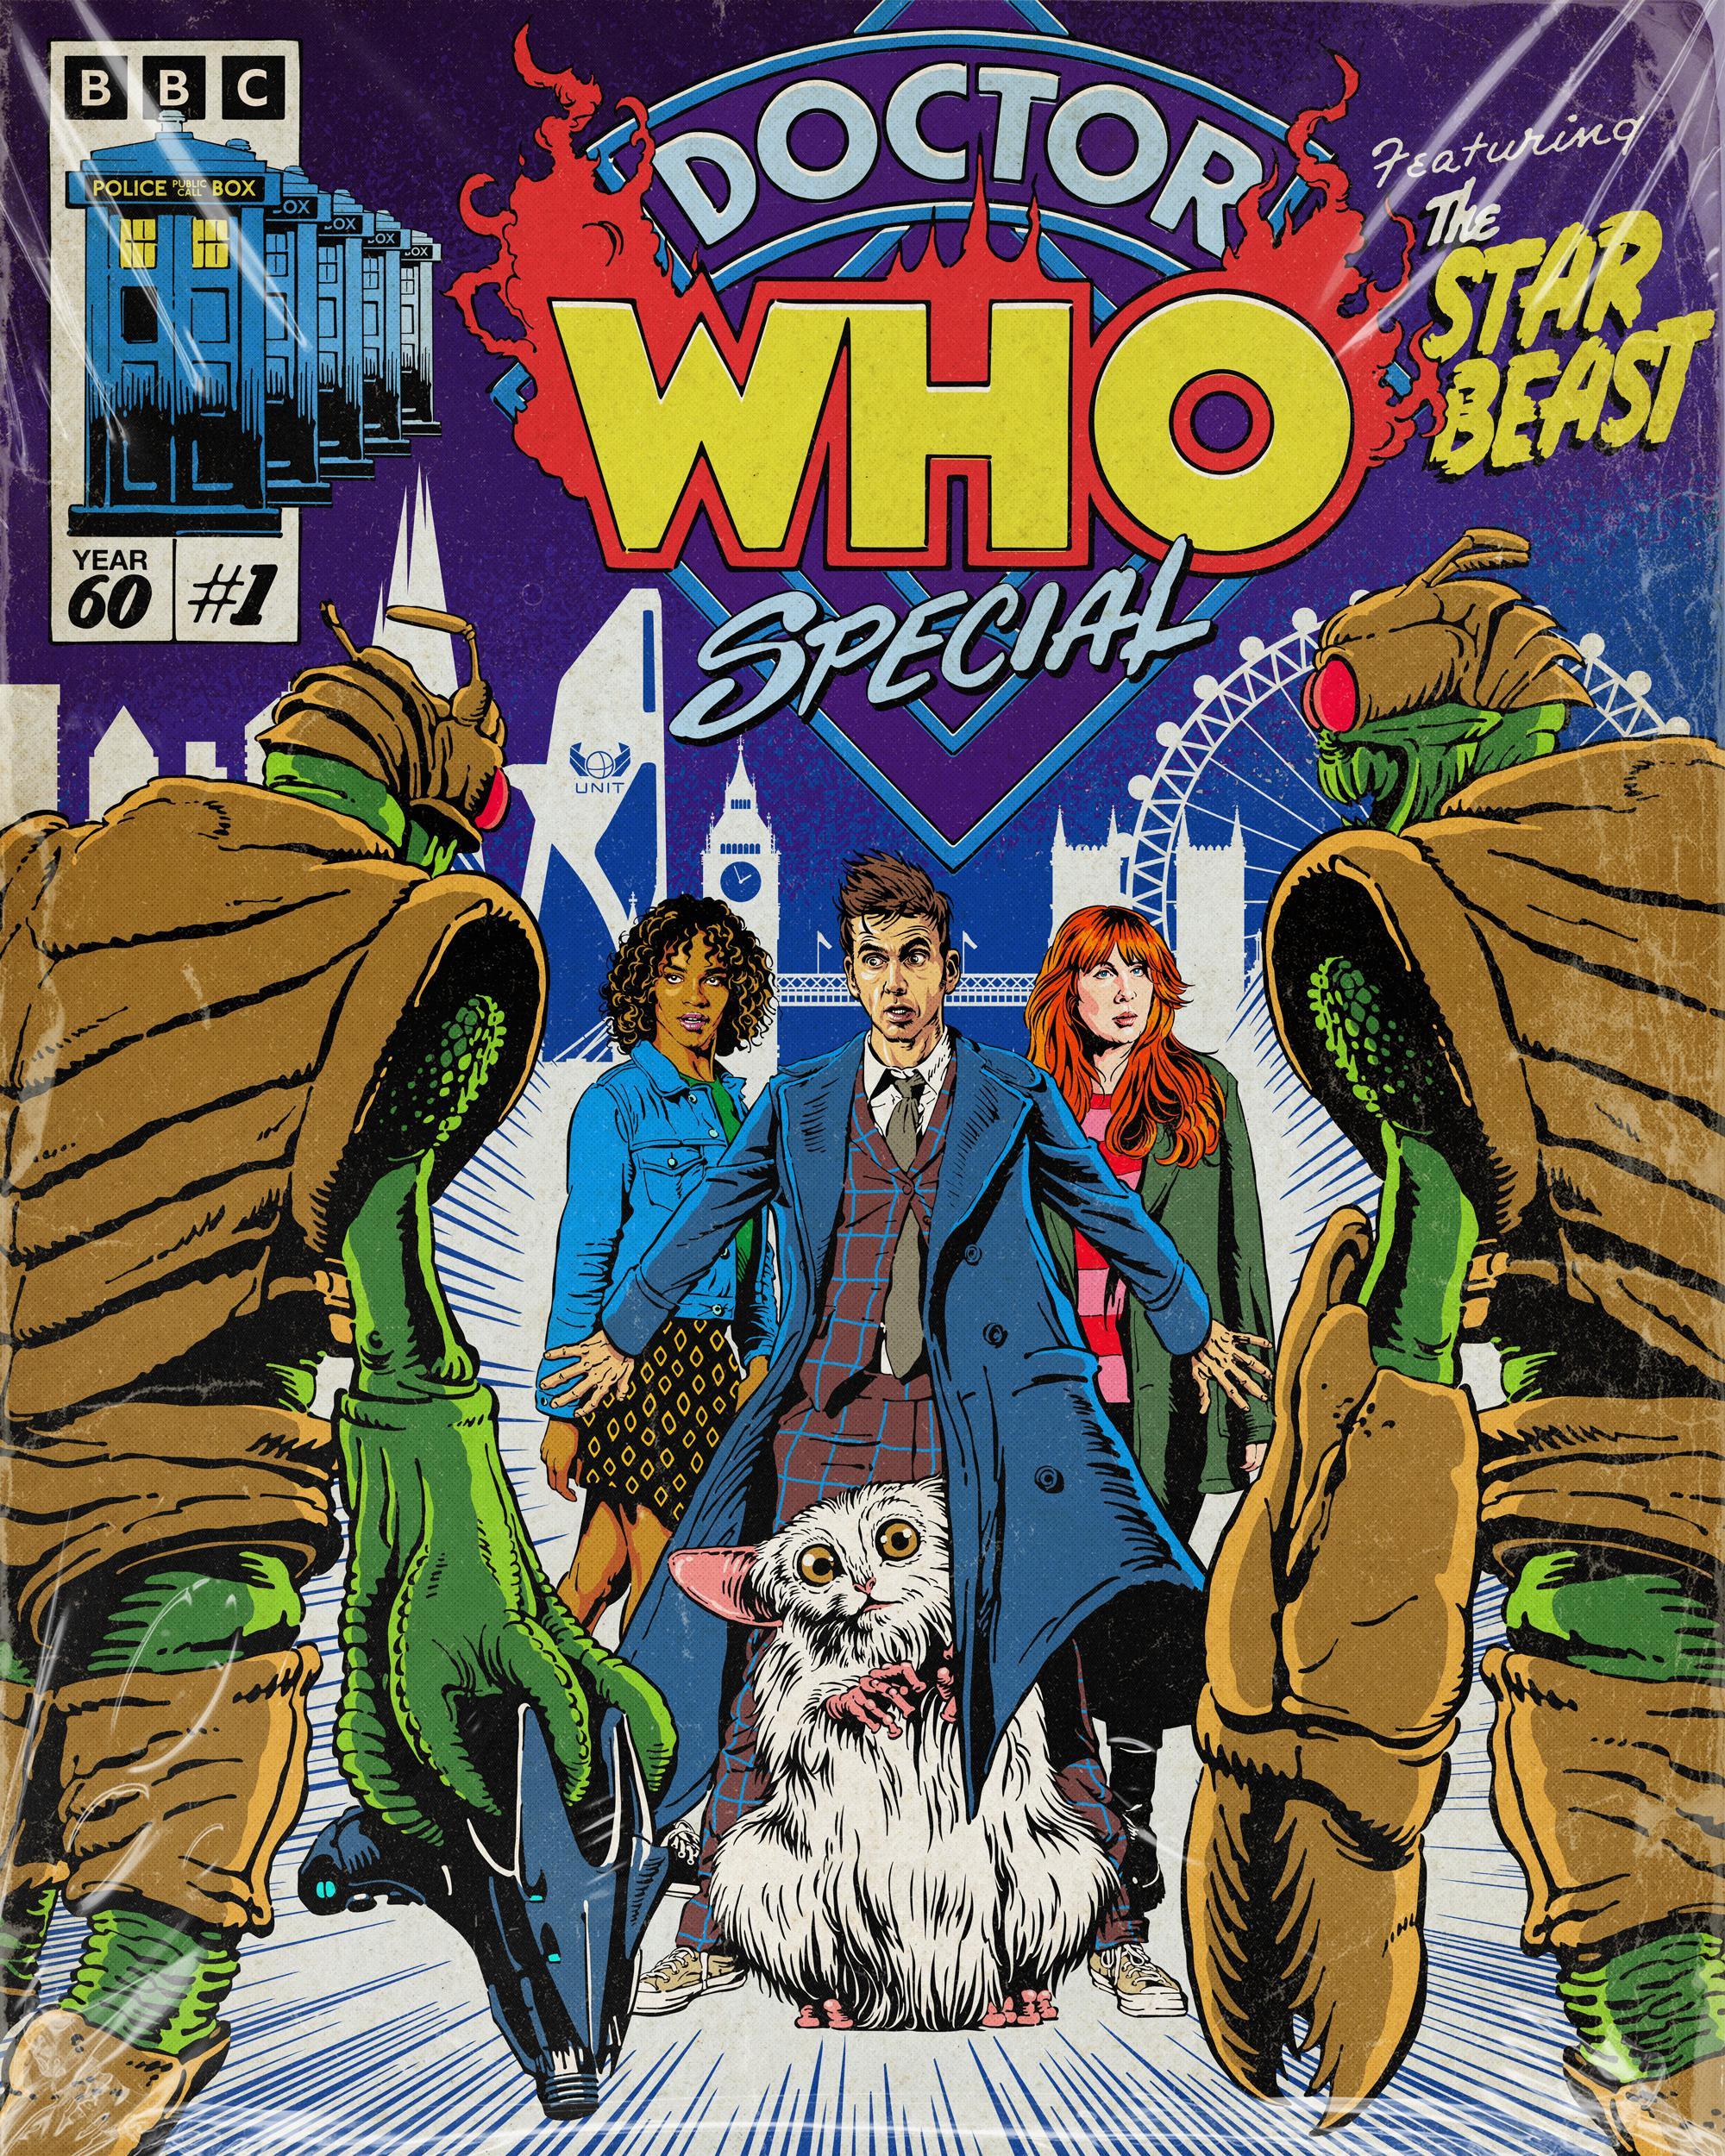 Doctor Who "The Star Beast" Is Based on a Marvel Comic Drawn by